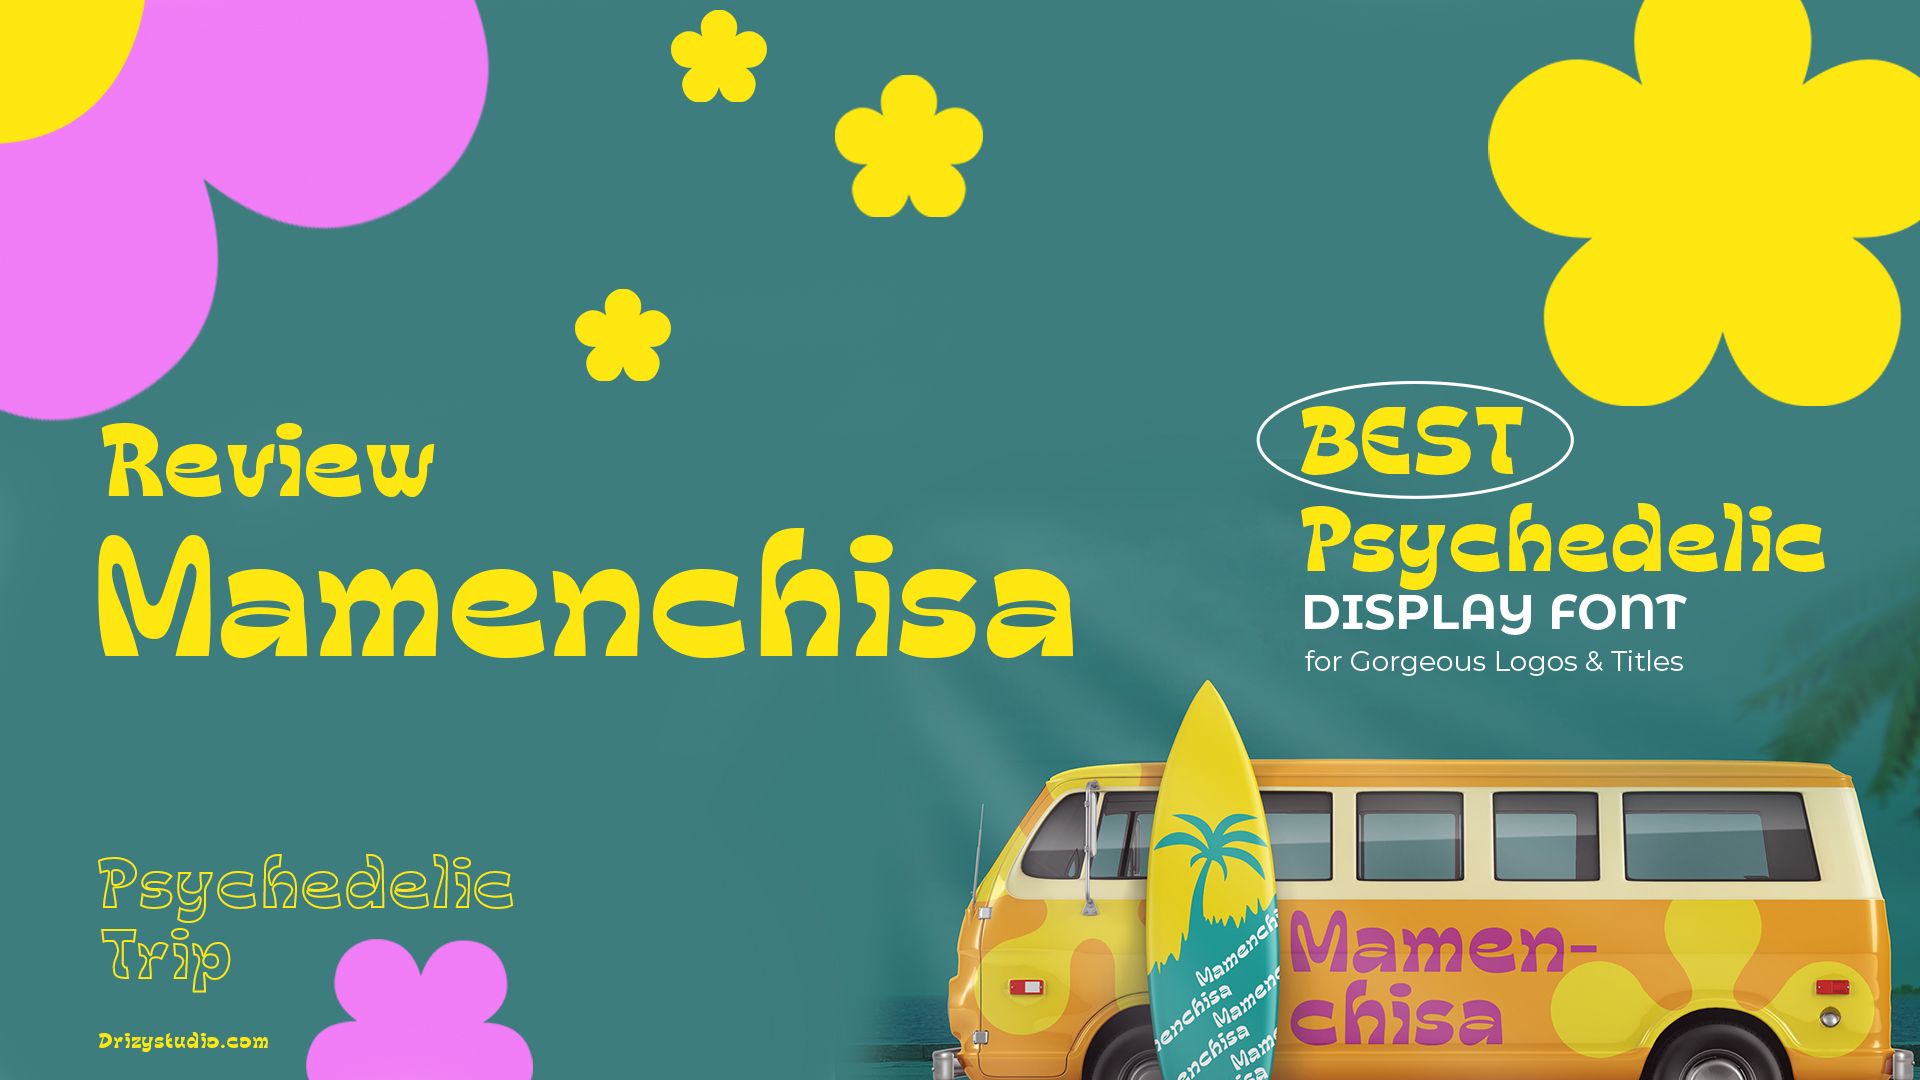 Review Mamenchisa Best Psychedelic Display Font for Gorgeous Logos Titles